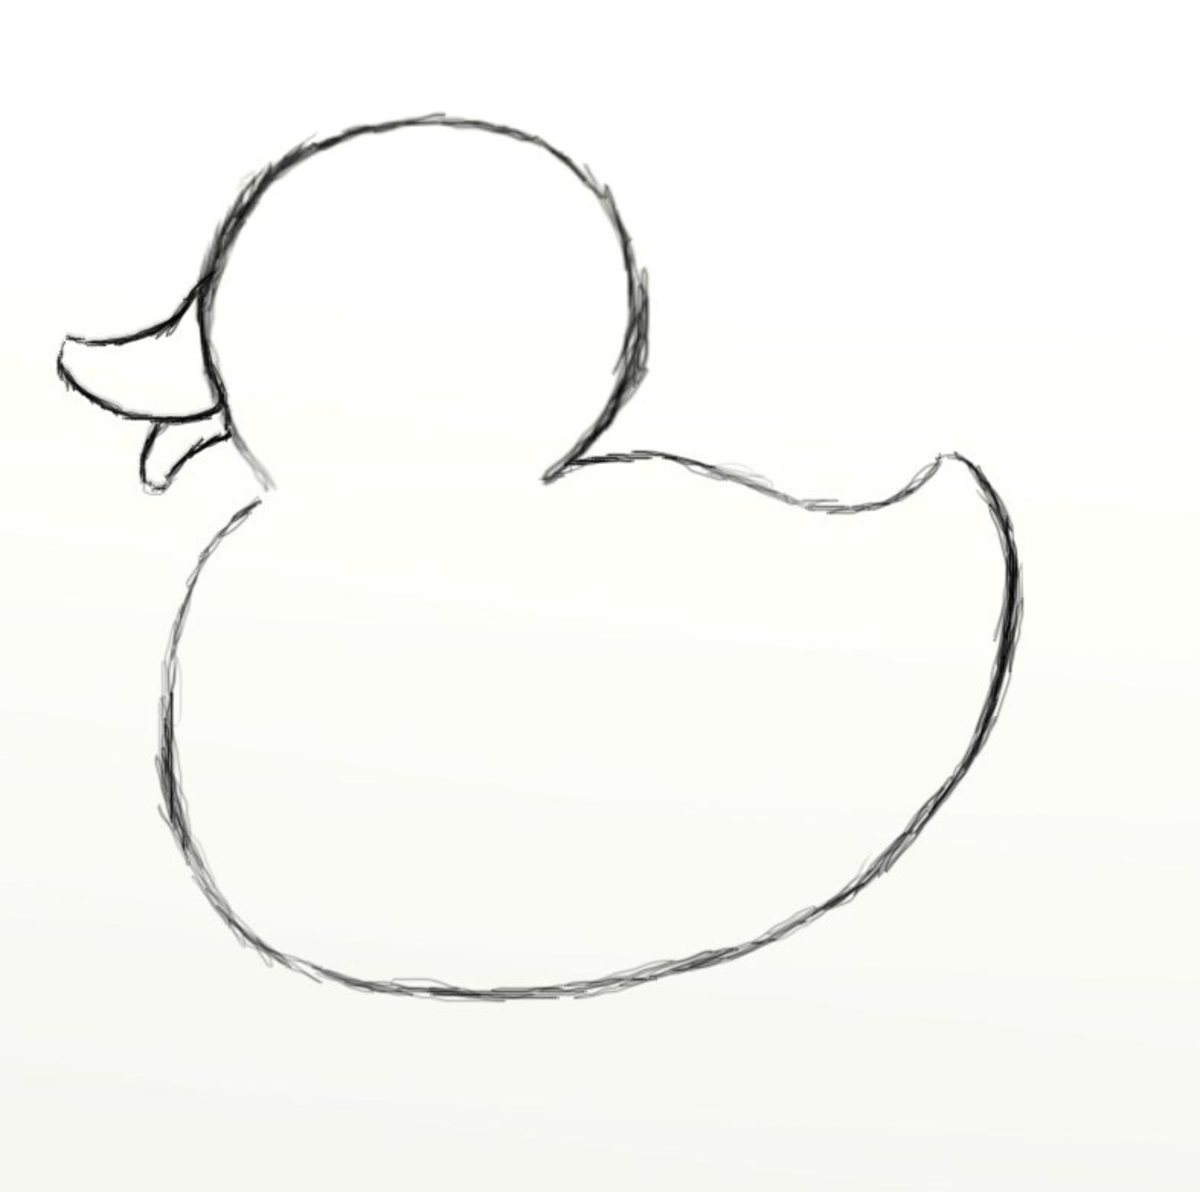 Duck drawing easy step by step | How to draw a simple duck - YouTube